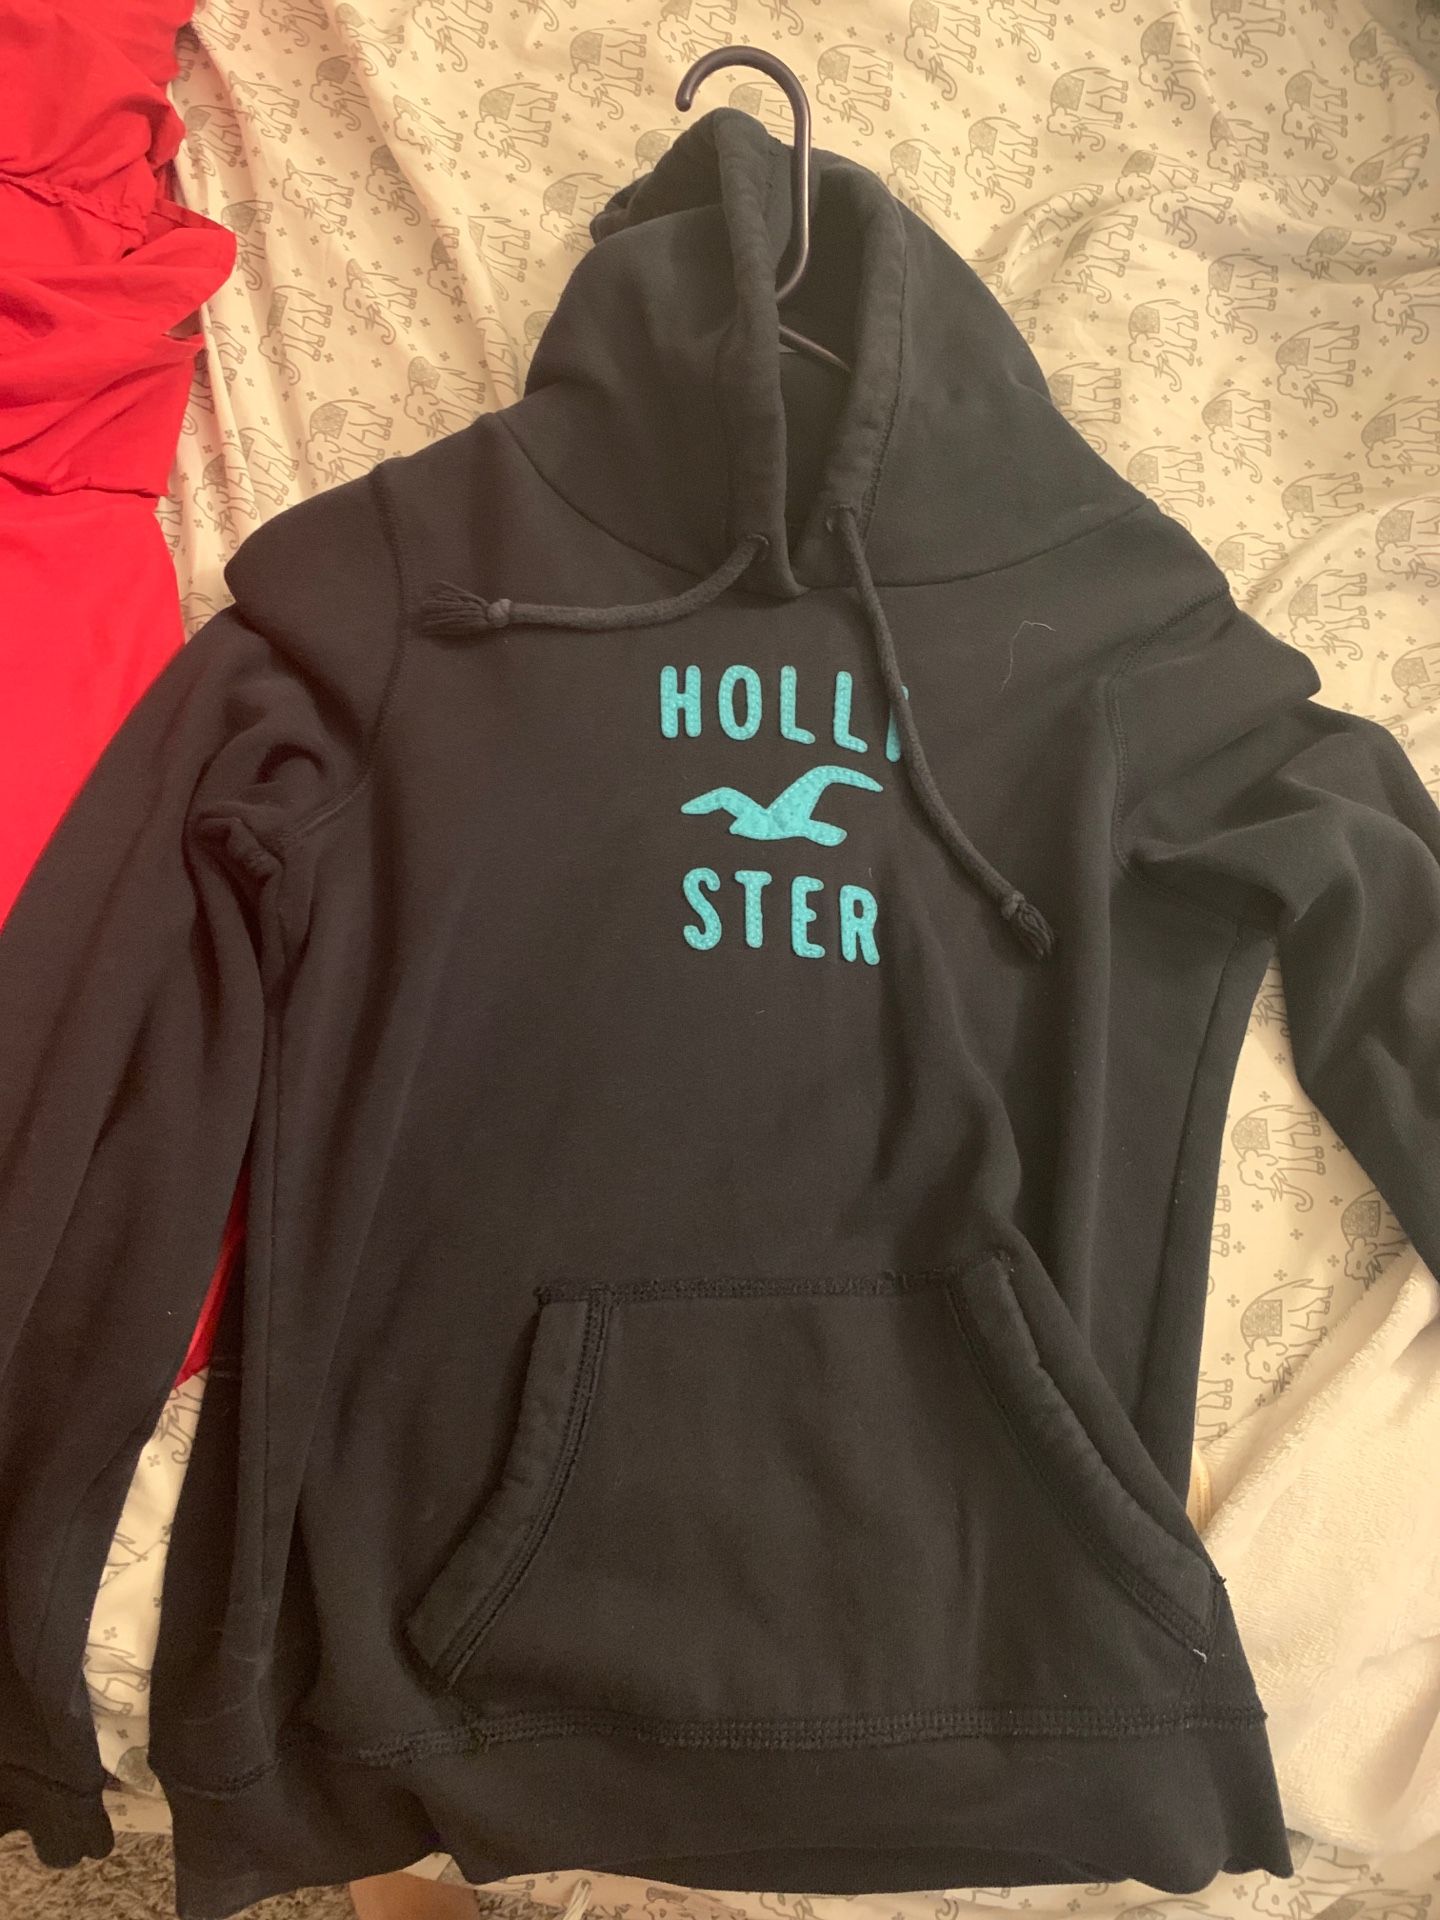 Hollister hoodie size M